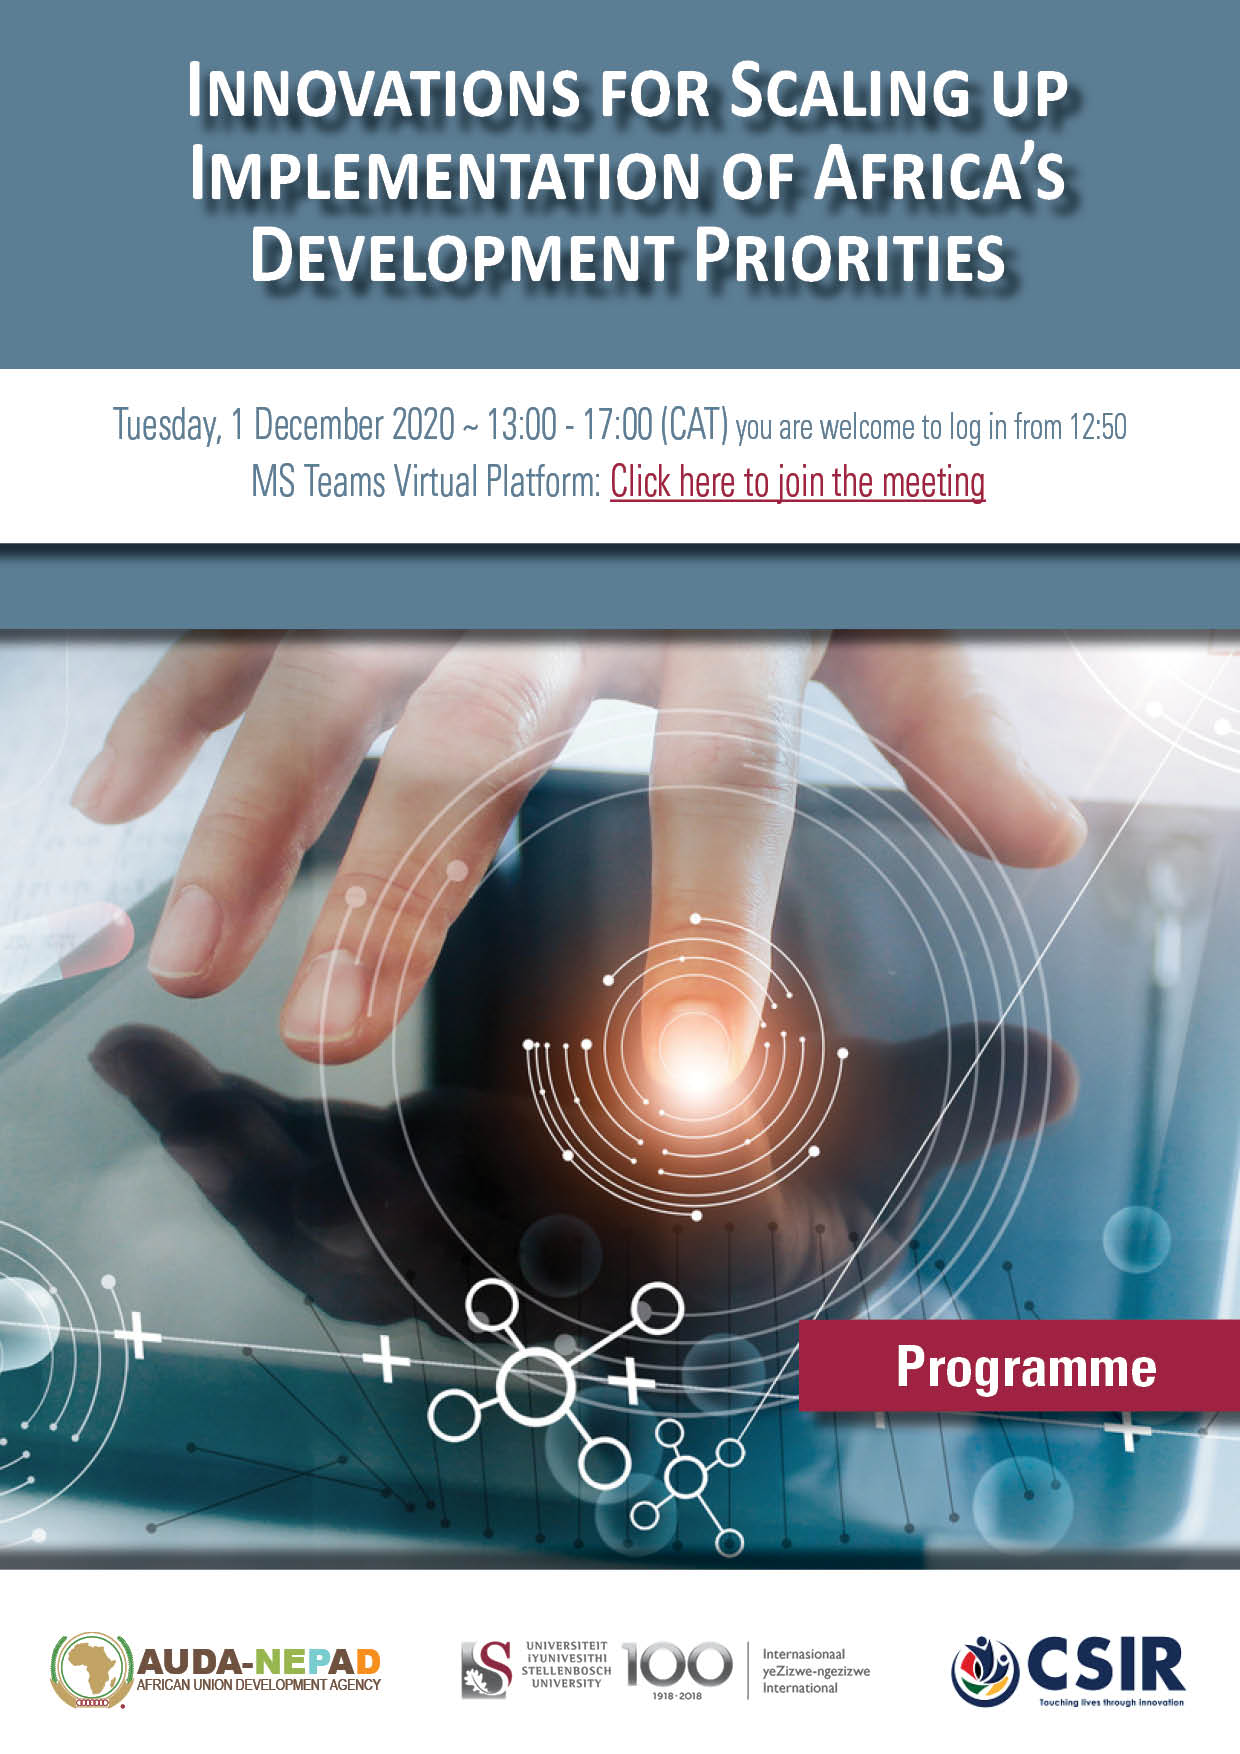 Programme: Innovations for Scaling up Implementation of Africa’s Development Priorities